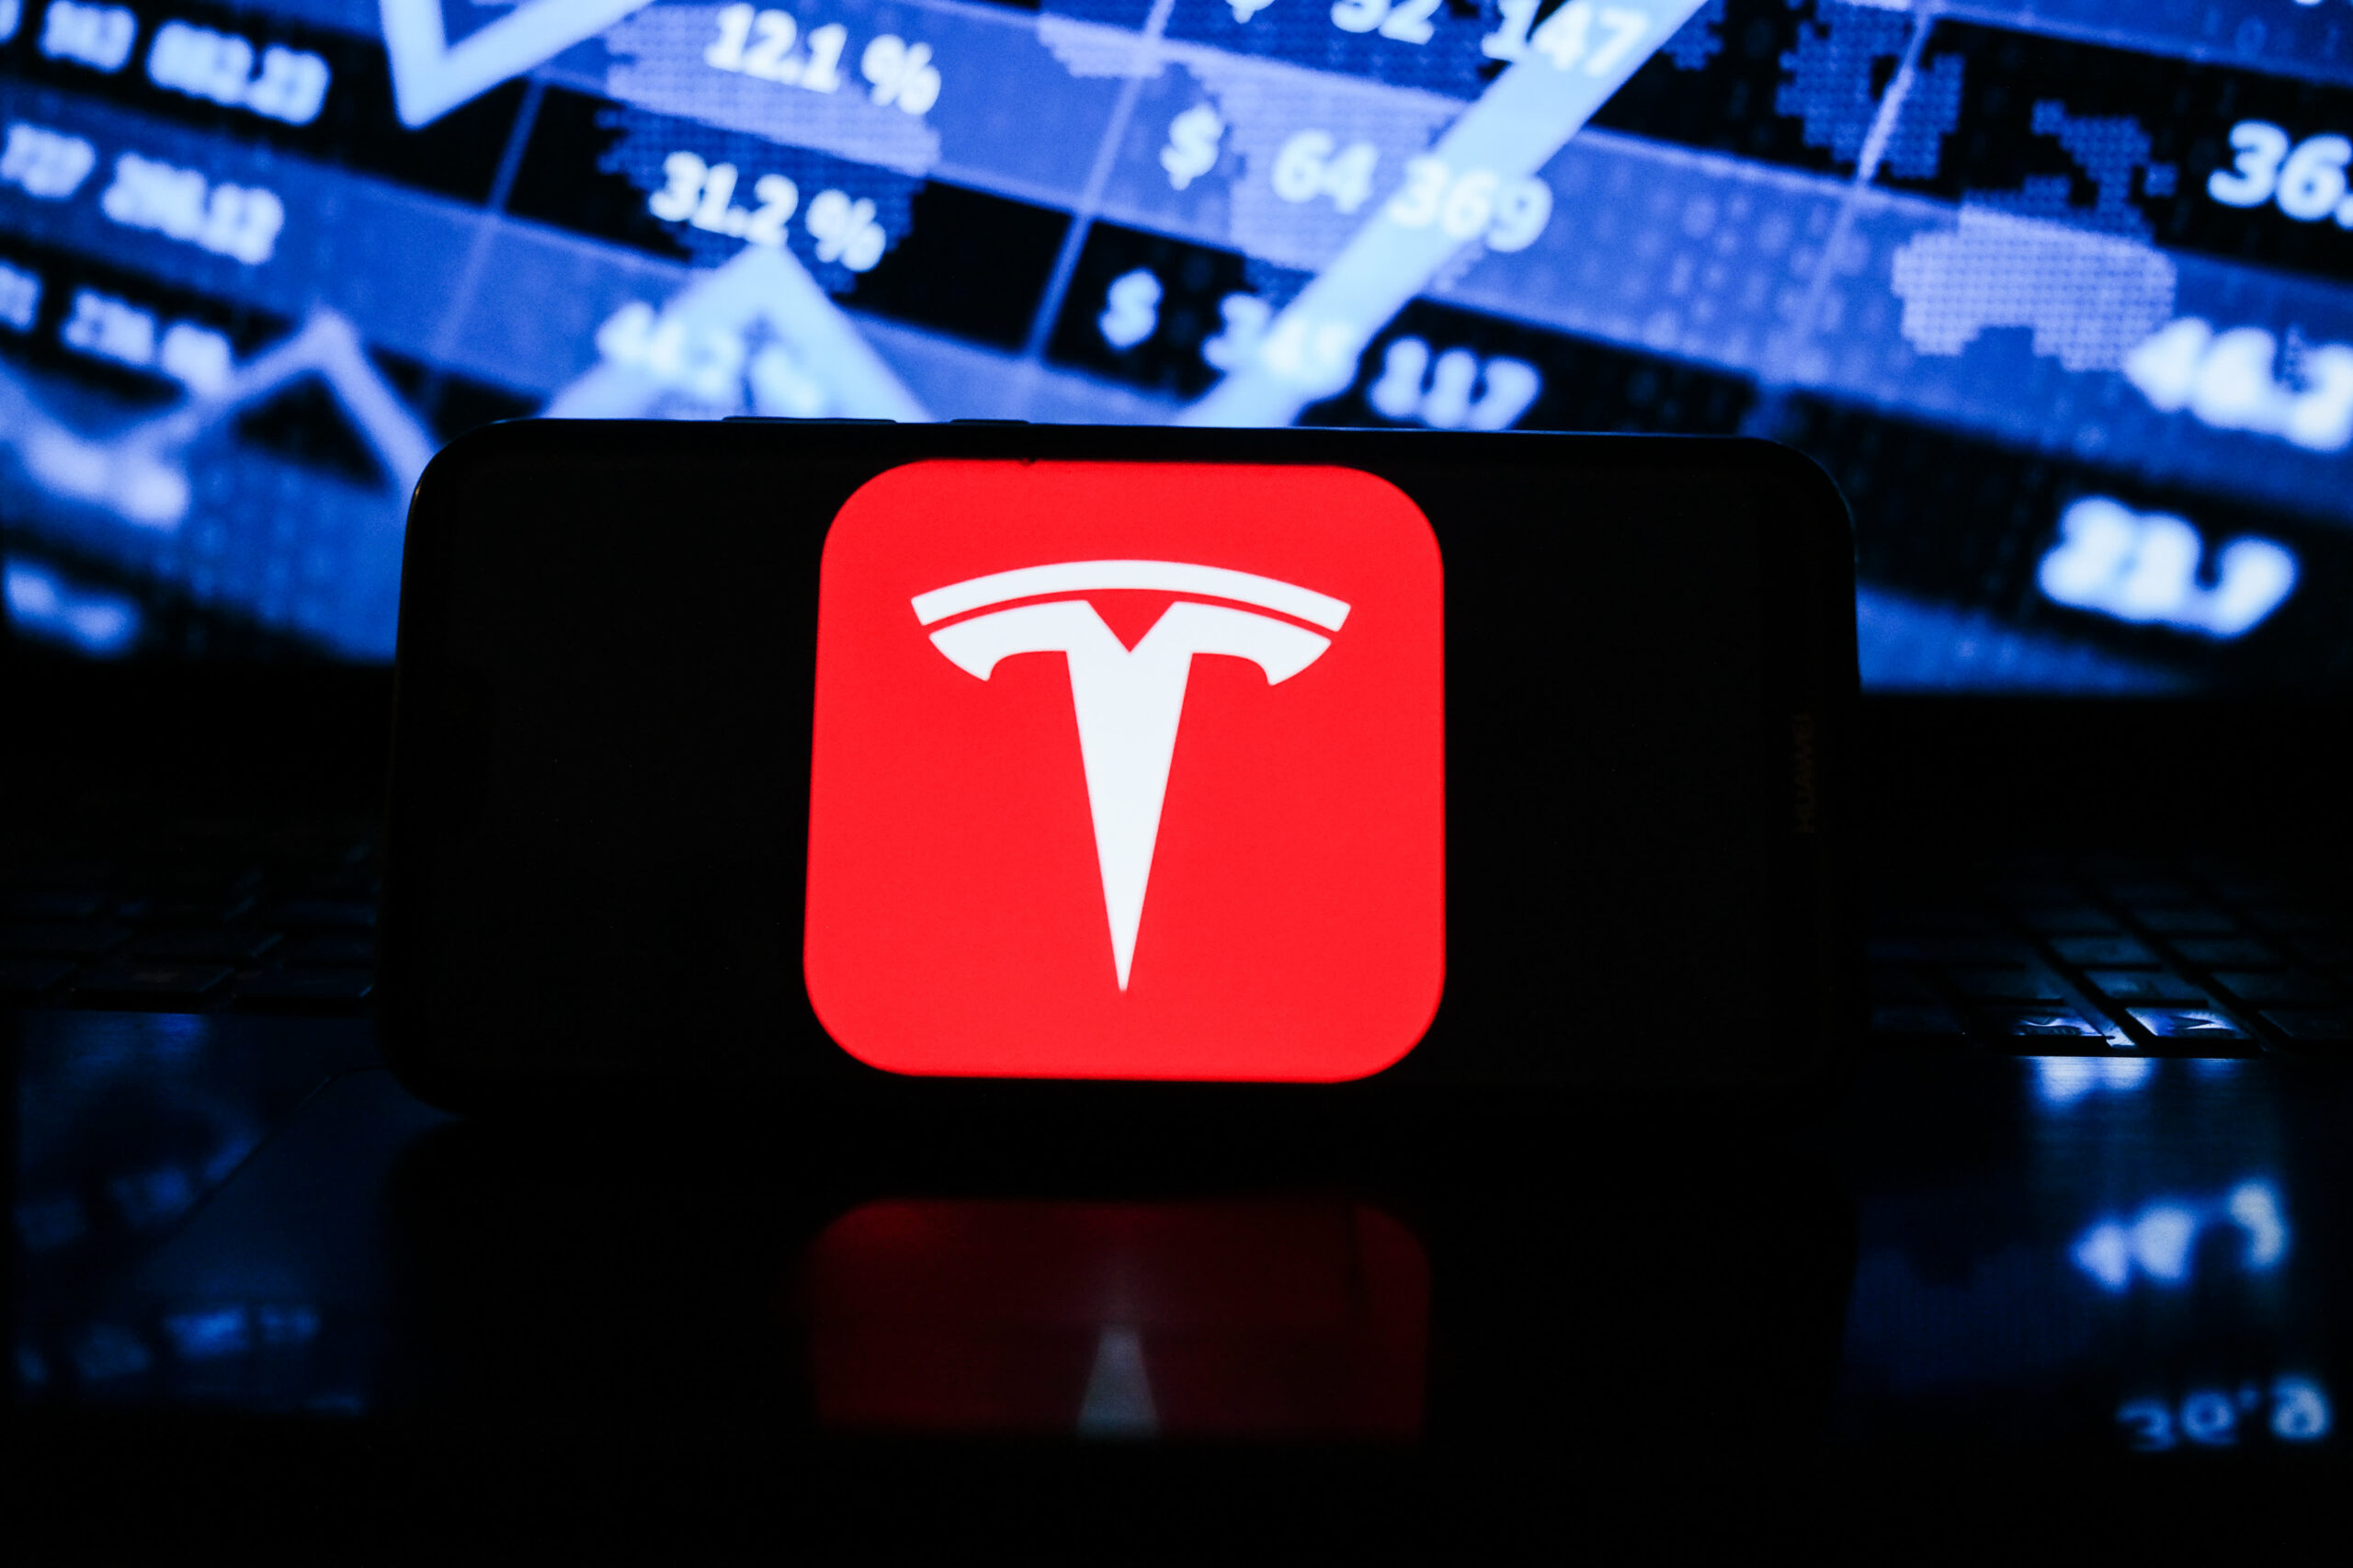 Cramer says Tesla is a phenomenon that seems to ‘go up endlessly on nothing’